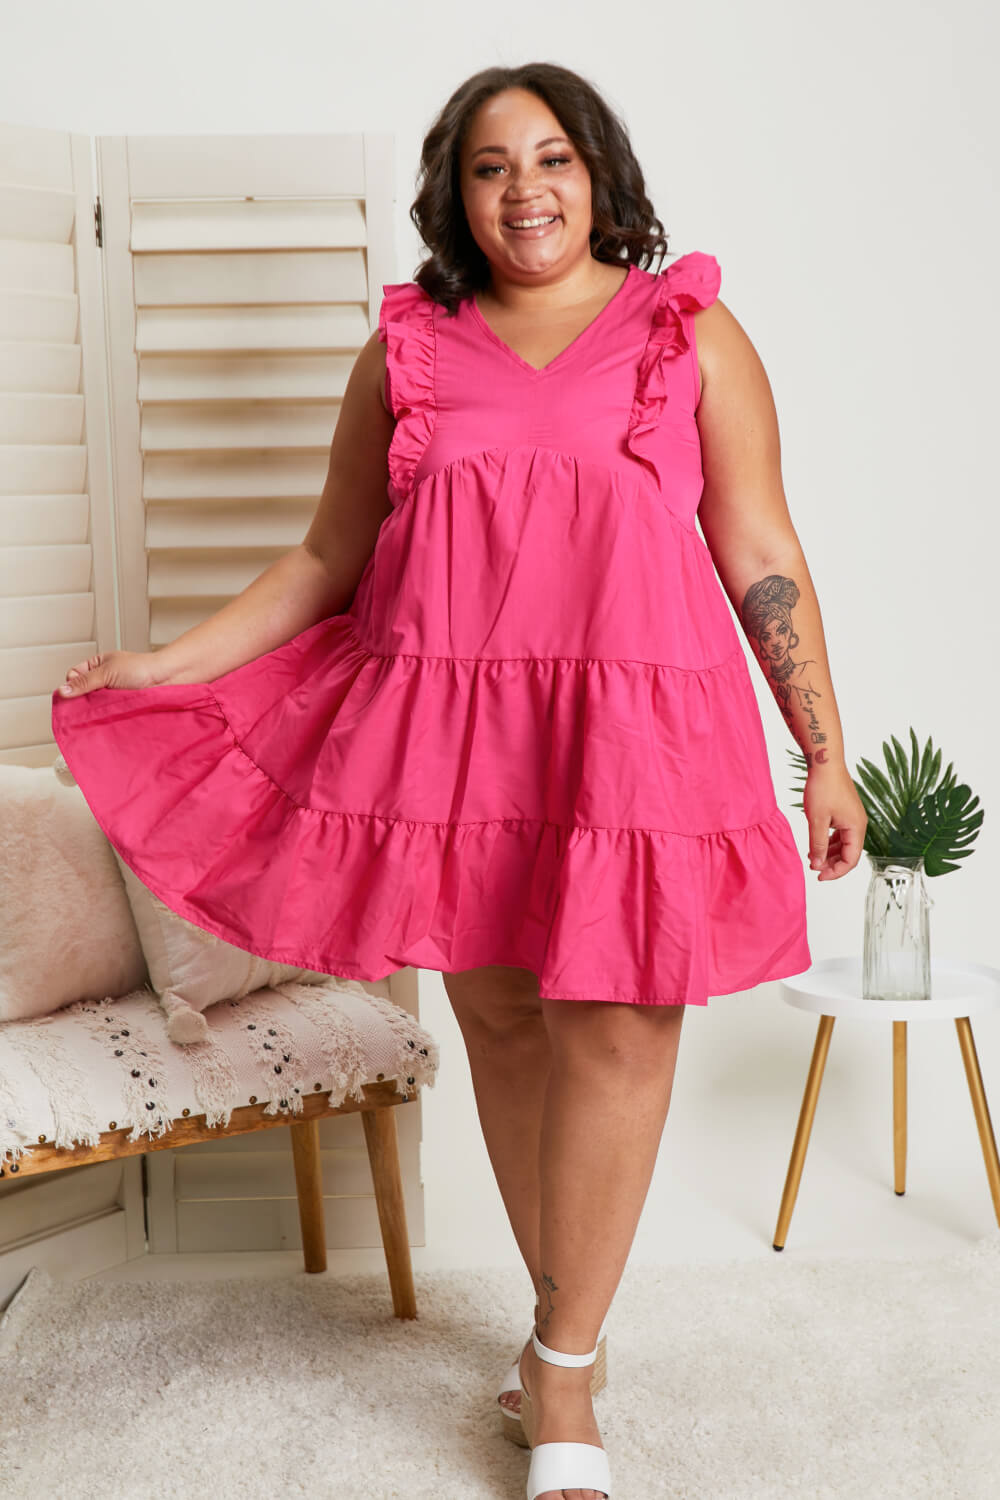 Champs Elysees Tiered Dress in Fuchsia